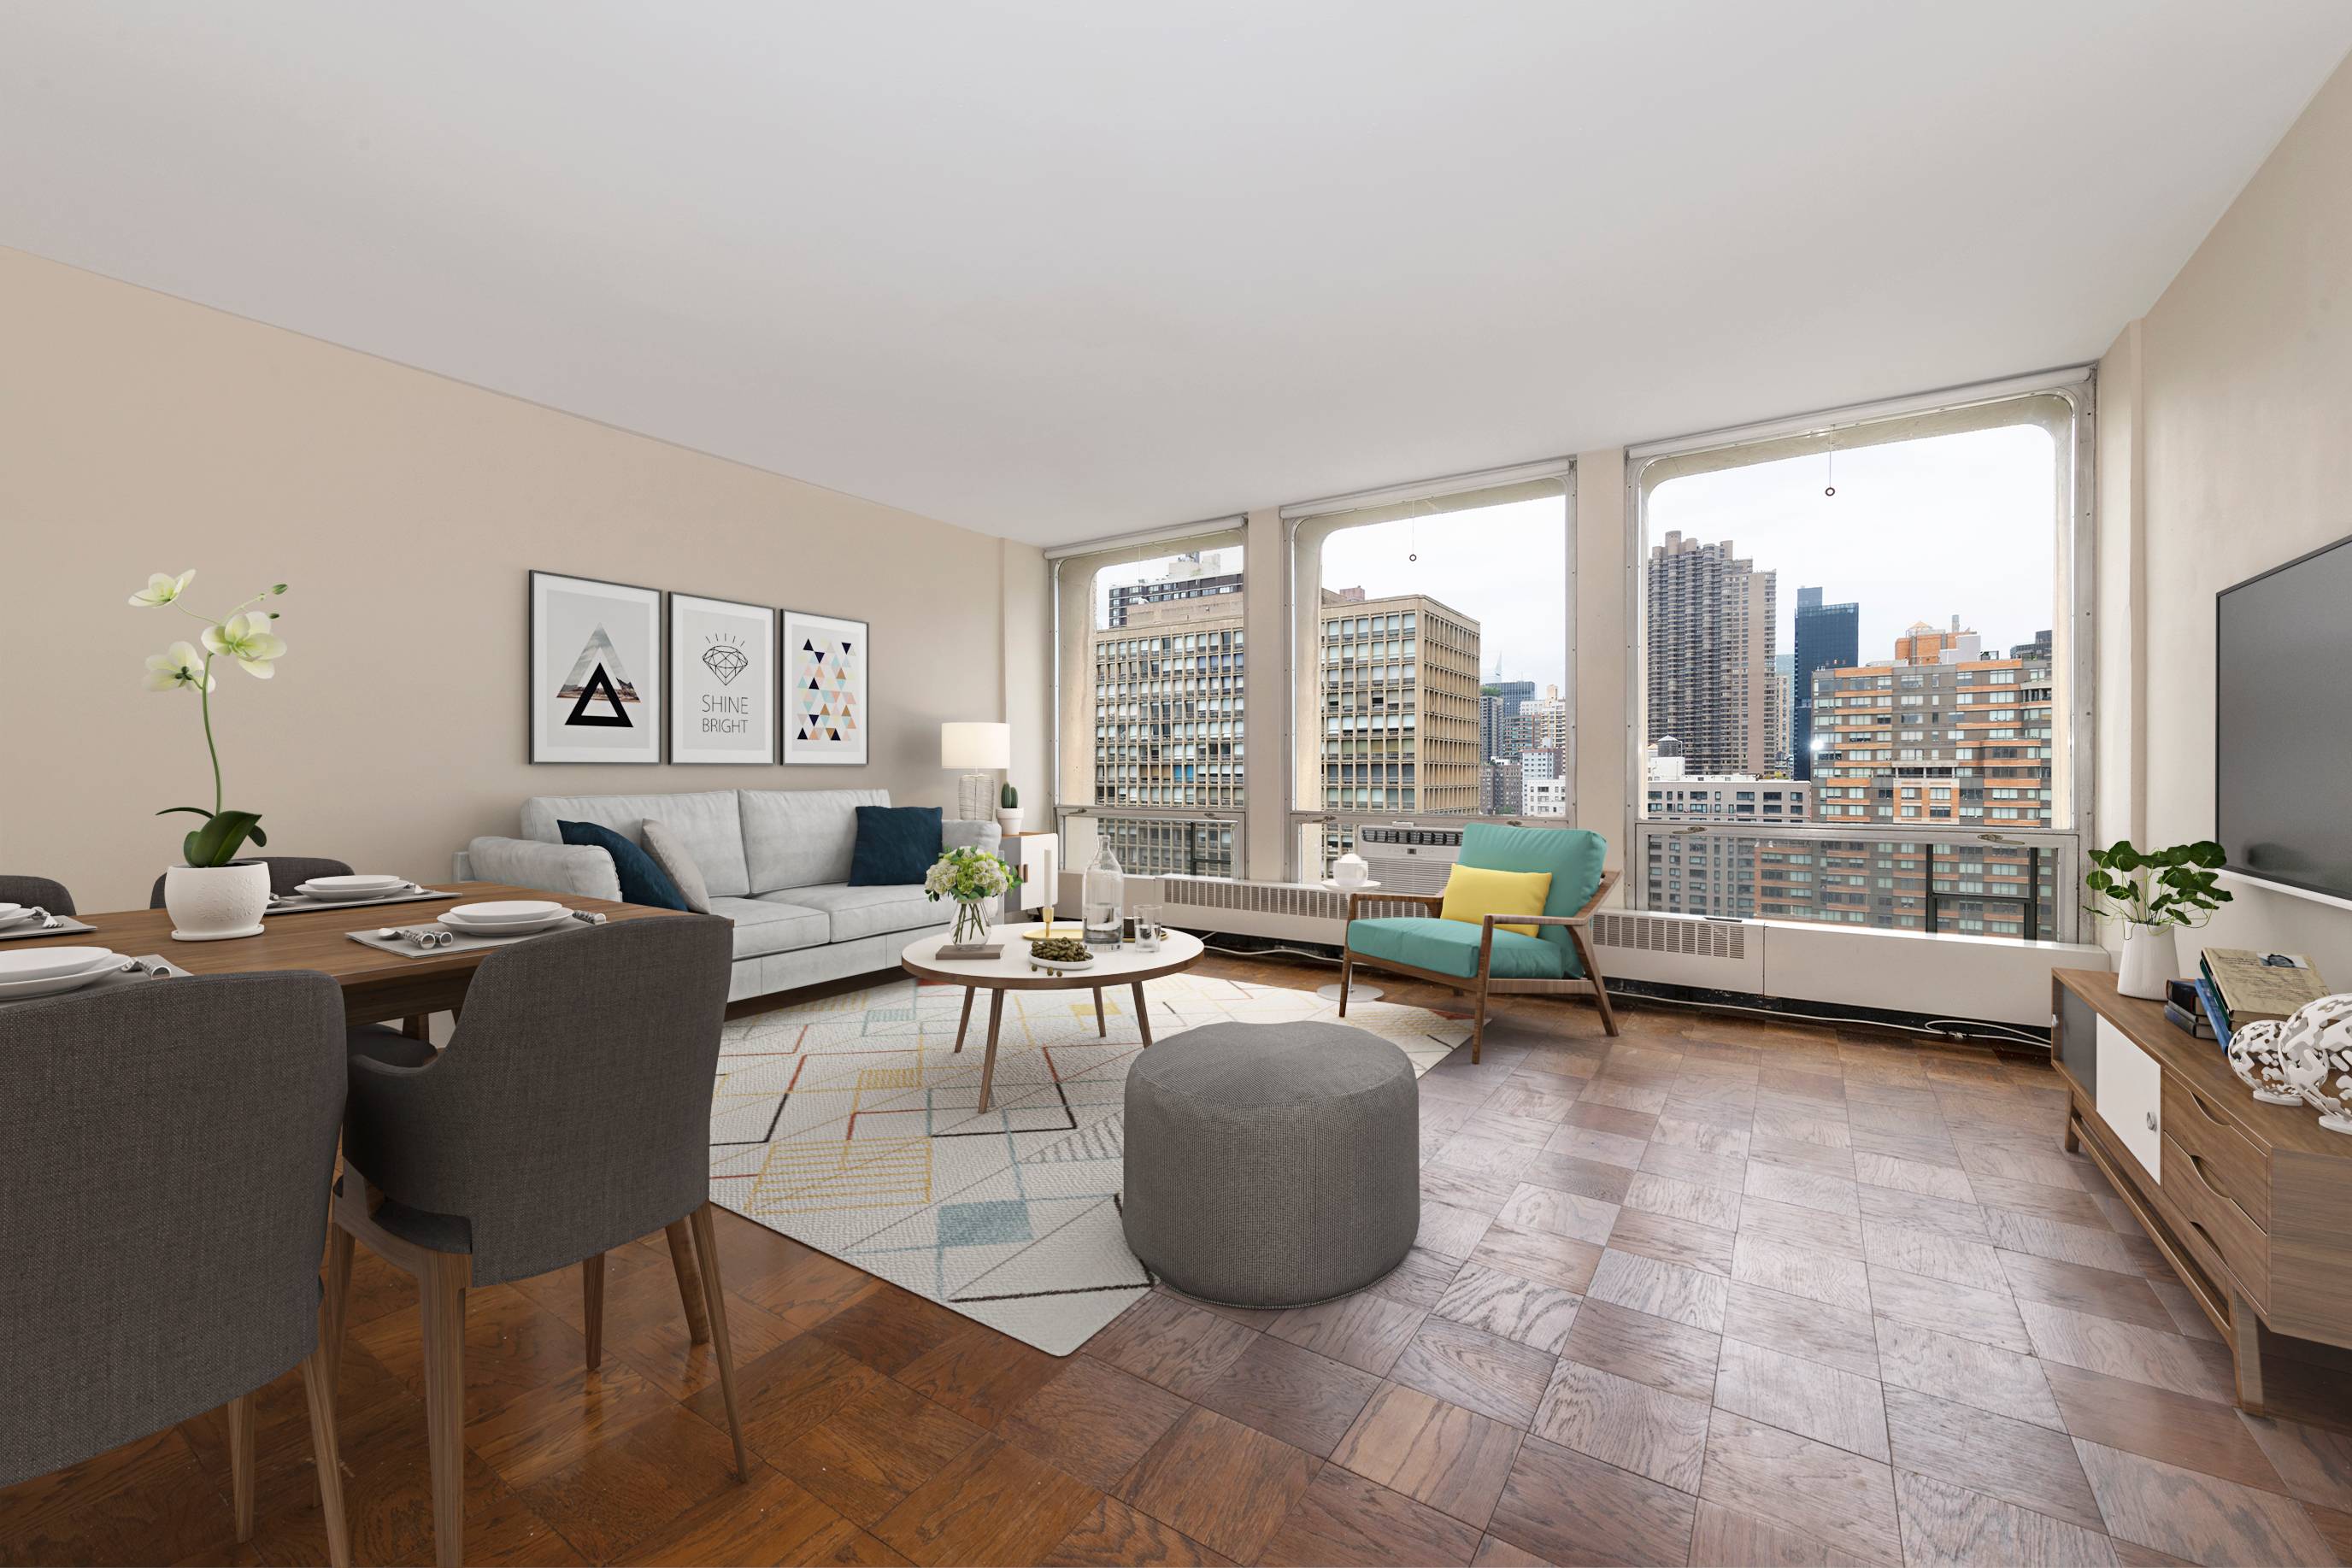 High Floor, spacious and move in ready 1 bedroom at the coveted Kips Bay Towers.